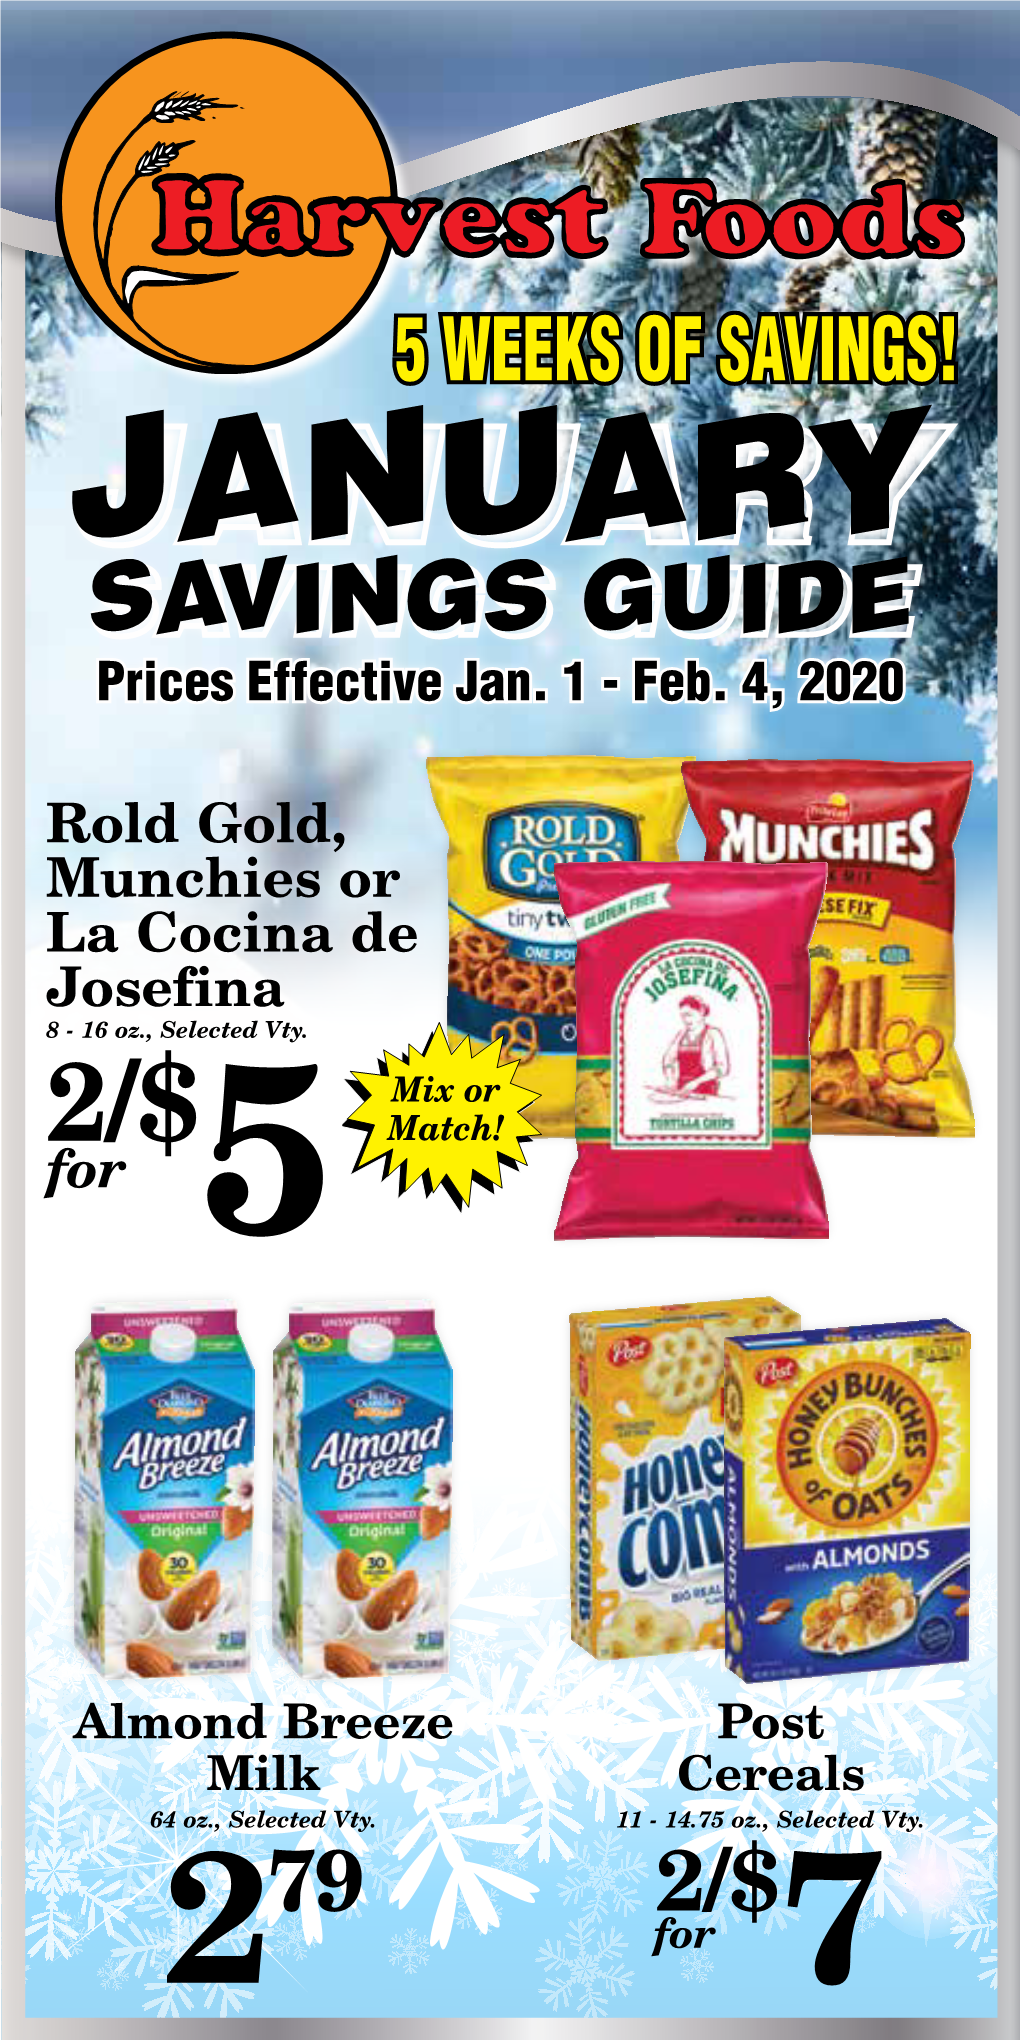 JANUARY SAVINGS GUIDE Prices Effective Jan